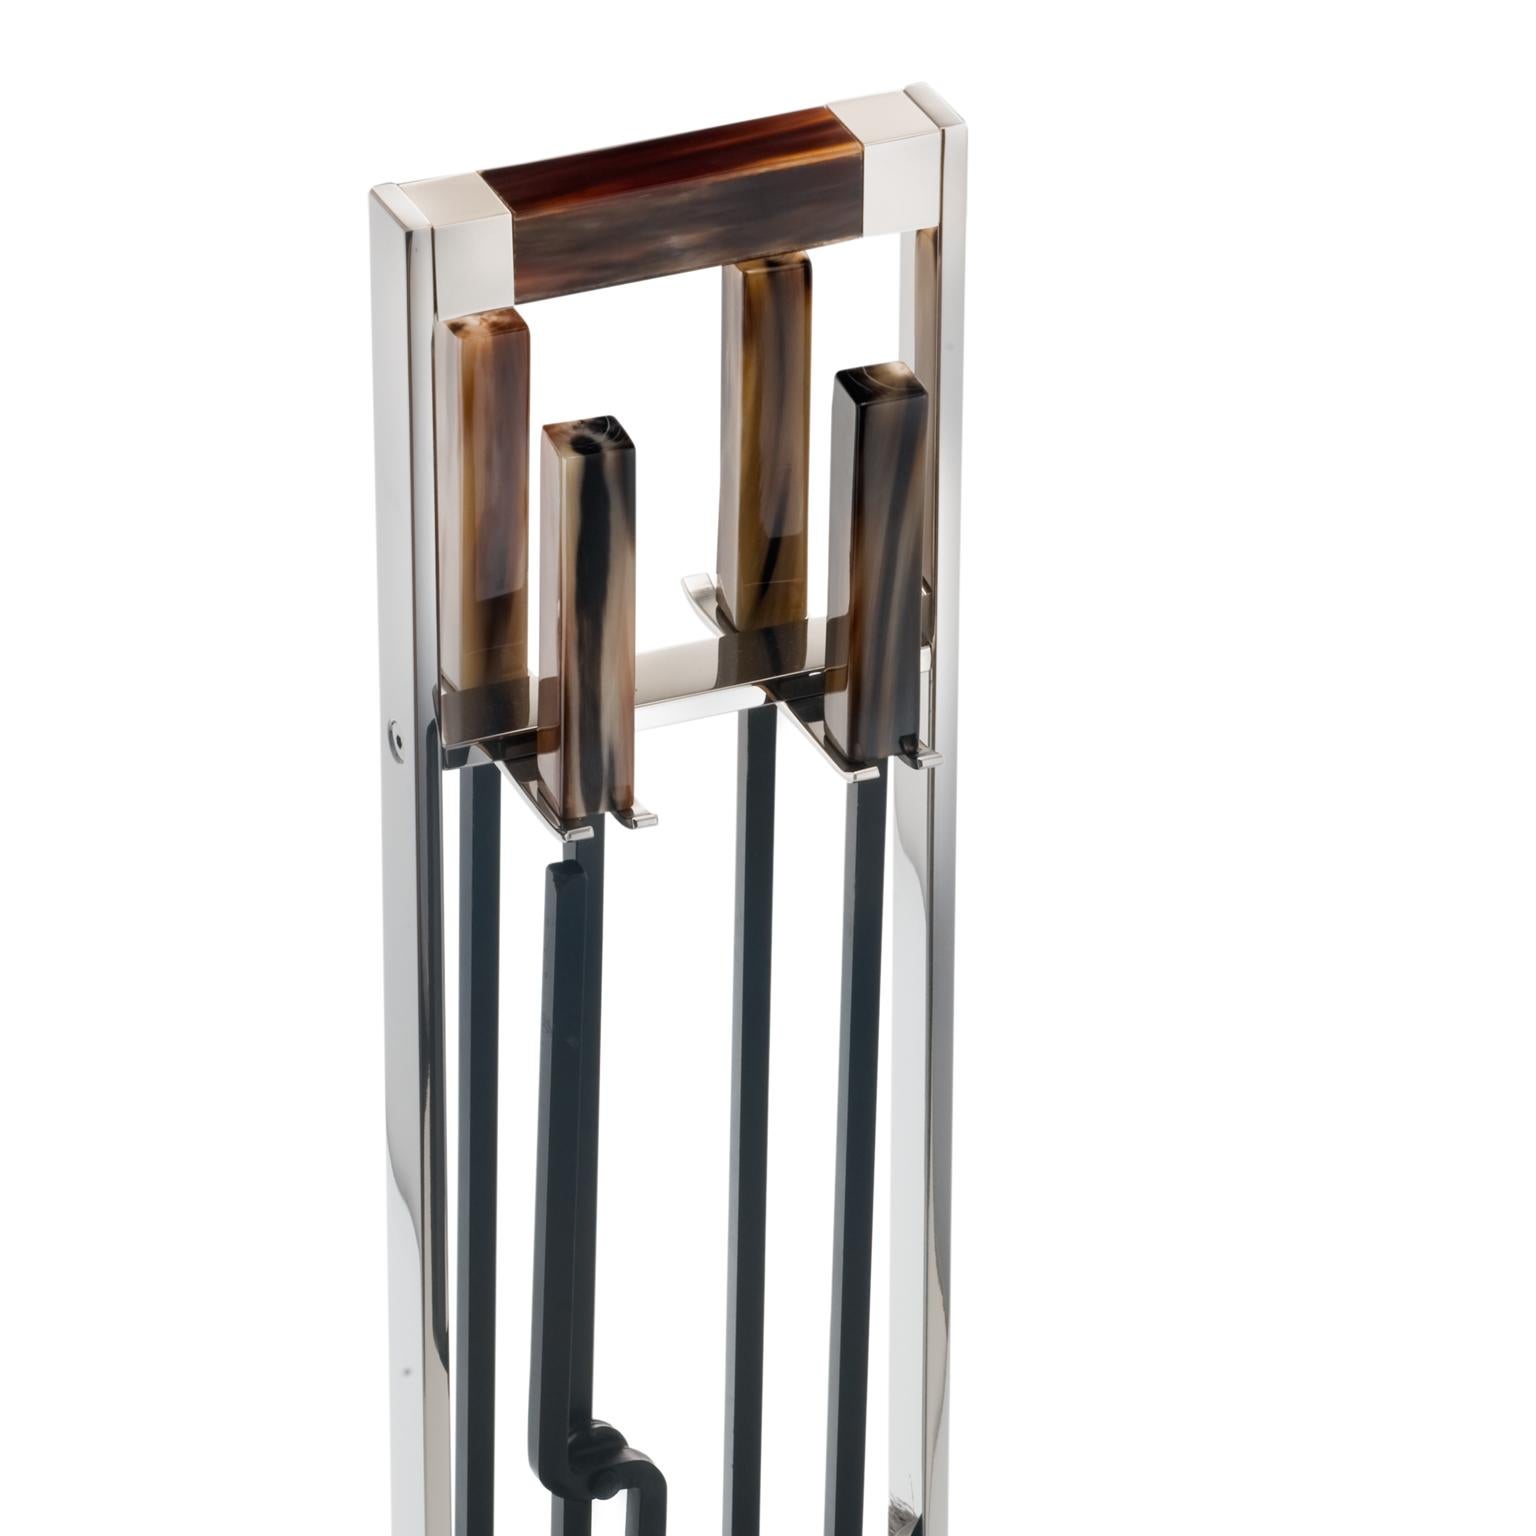 Defined by straight lines and aesthetic lightness, the Vesta tool set has all you need to maintain your fireplace crackling and neat with maximum style and functionality. An elegant stand in stainless steel houses a practical shovel, poker, brush